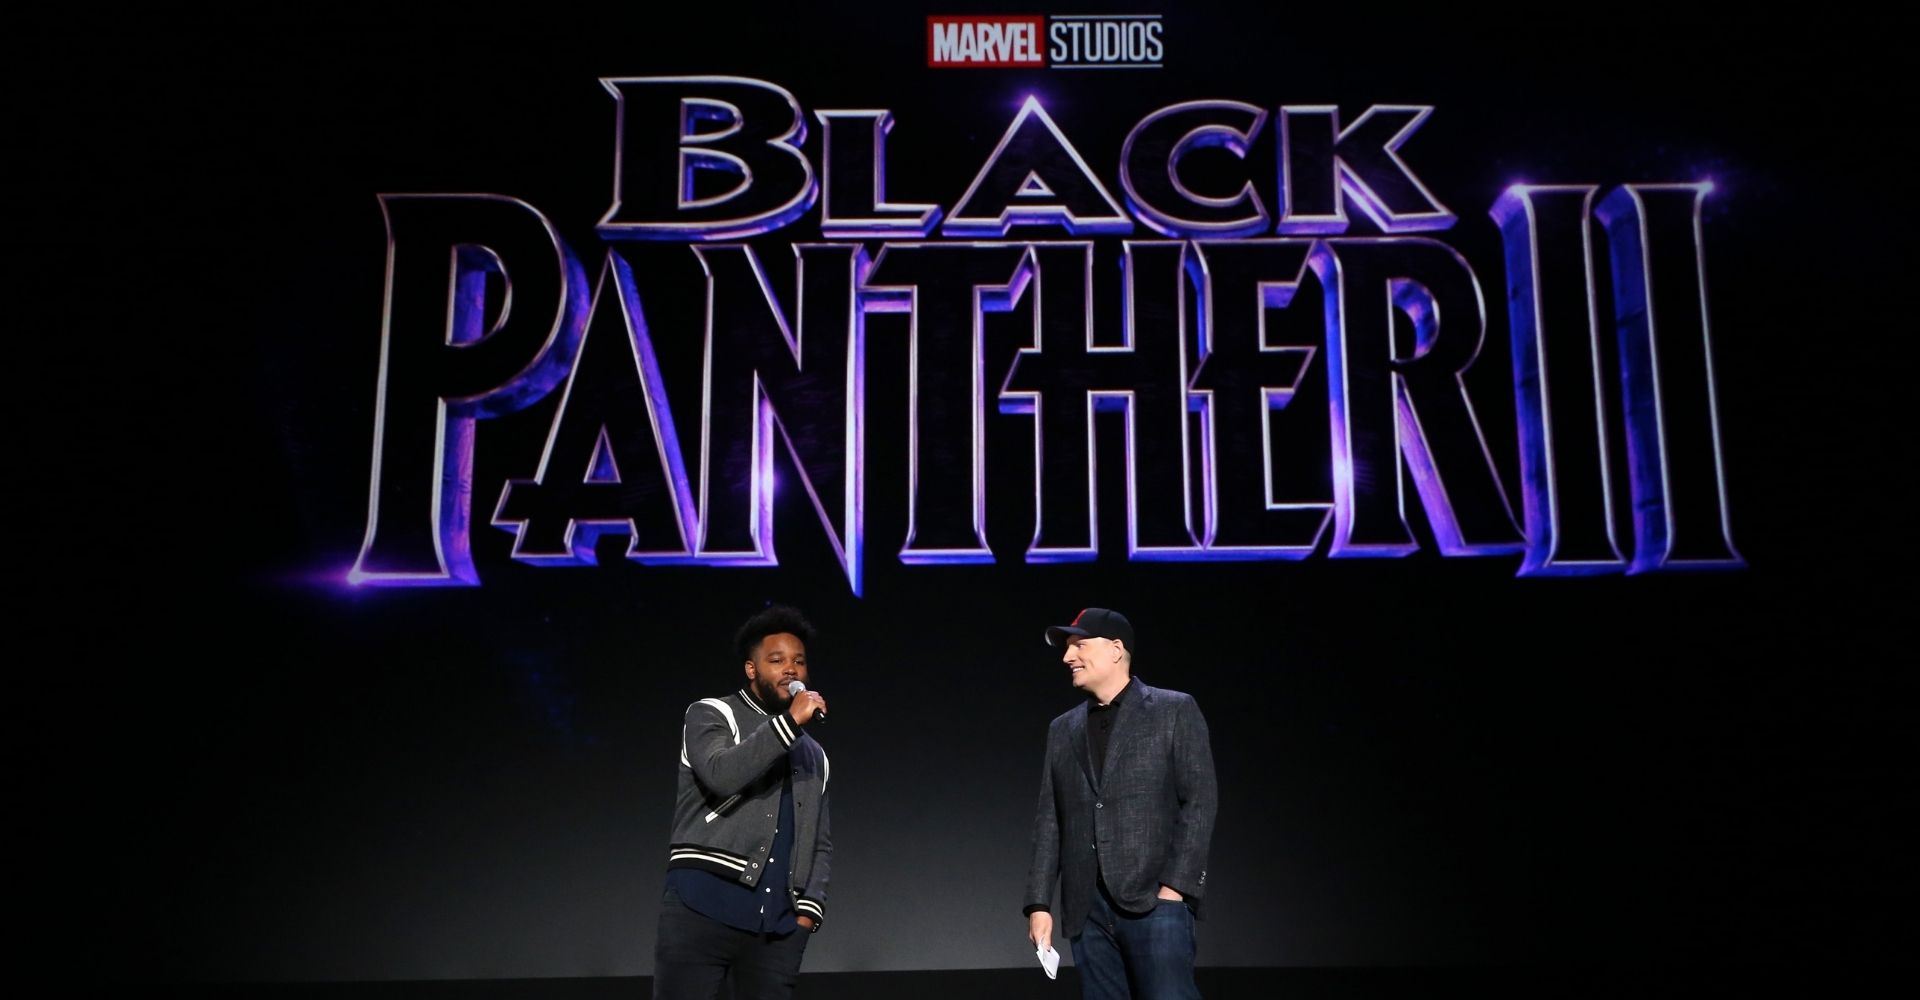 Black Panther Wakanda Forever premiere